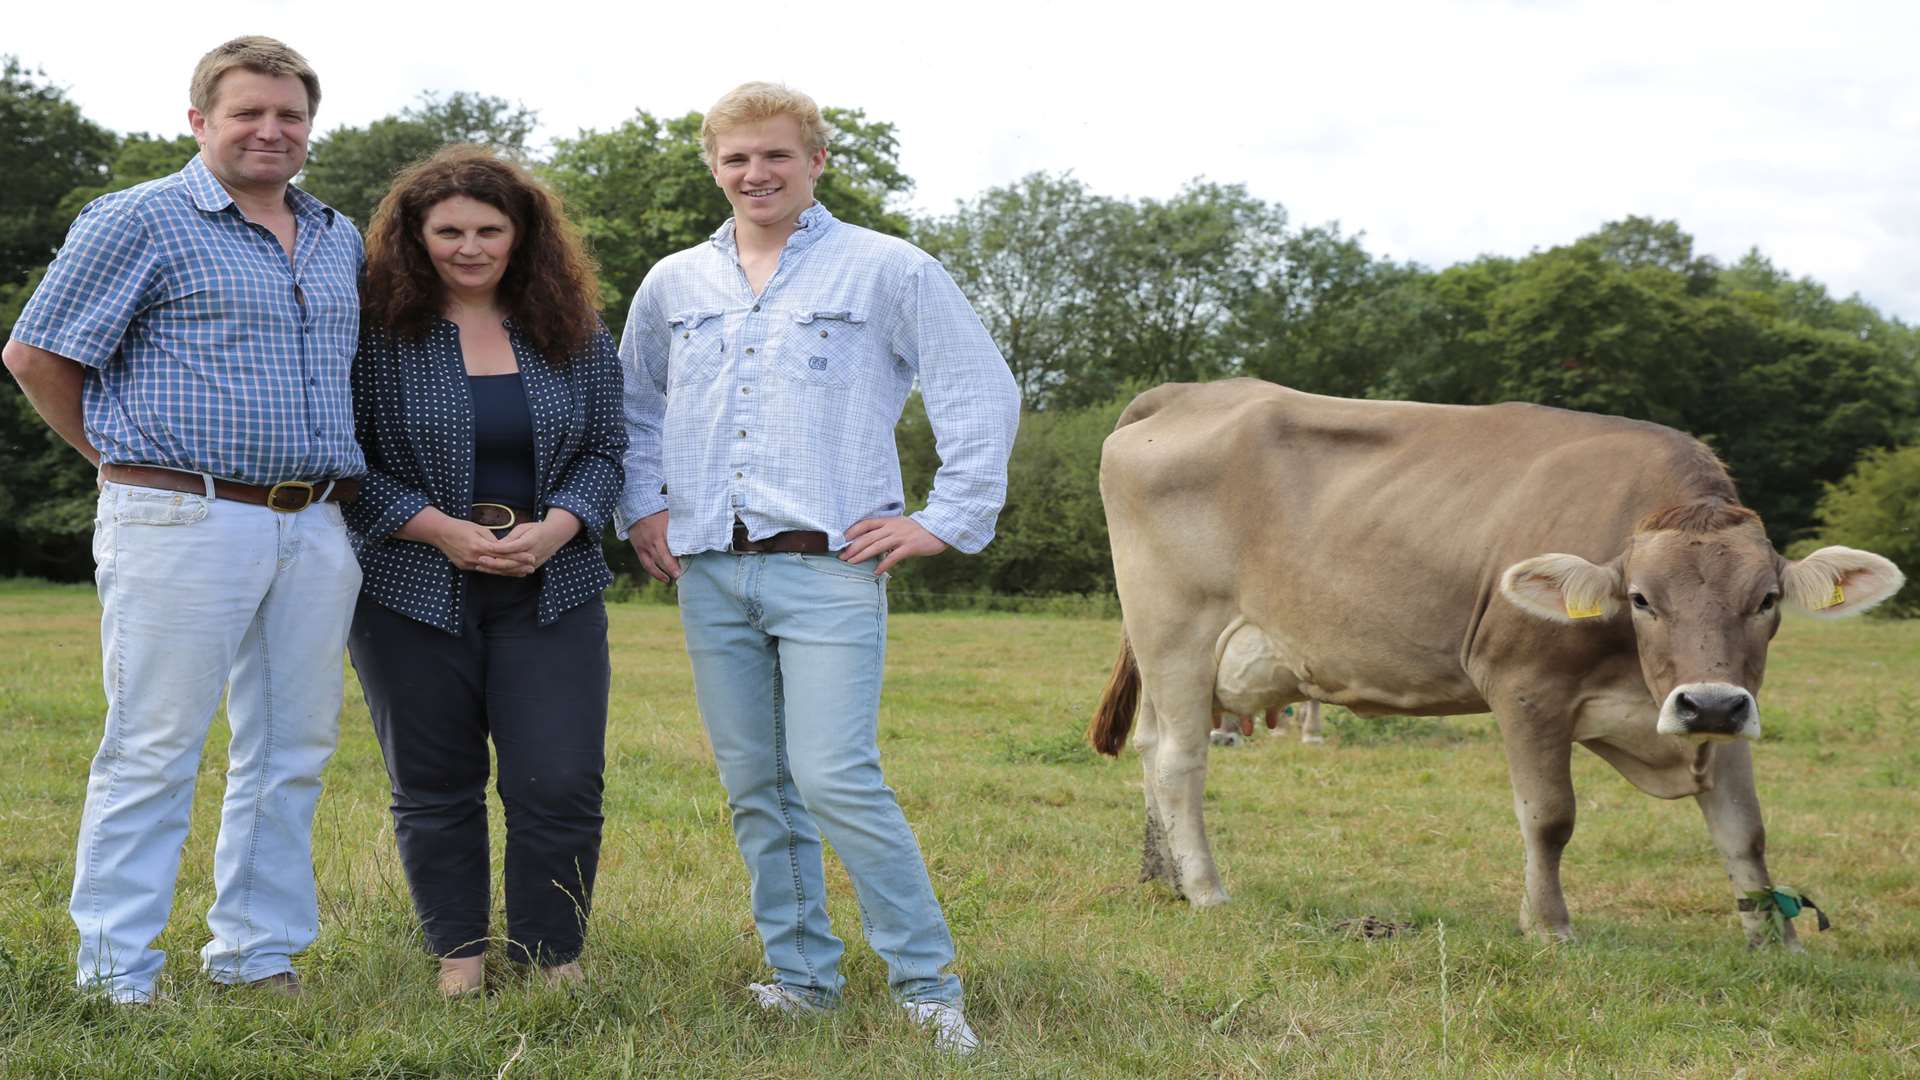 The Reynolds family has begun making cheese and bottling "Kentish milk" to add revenue as dairy farming becomes less profitable